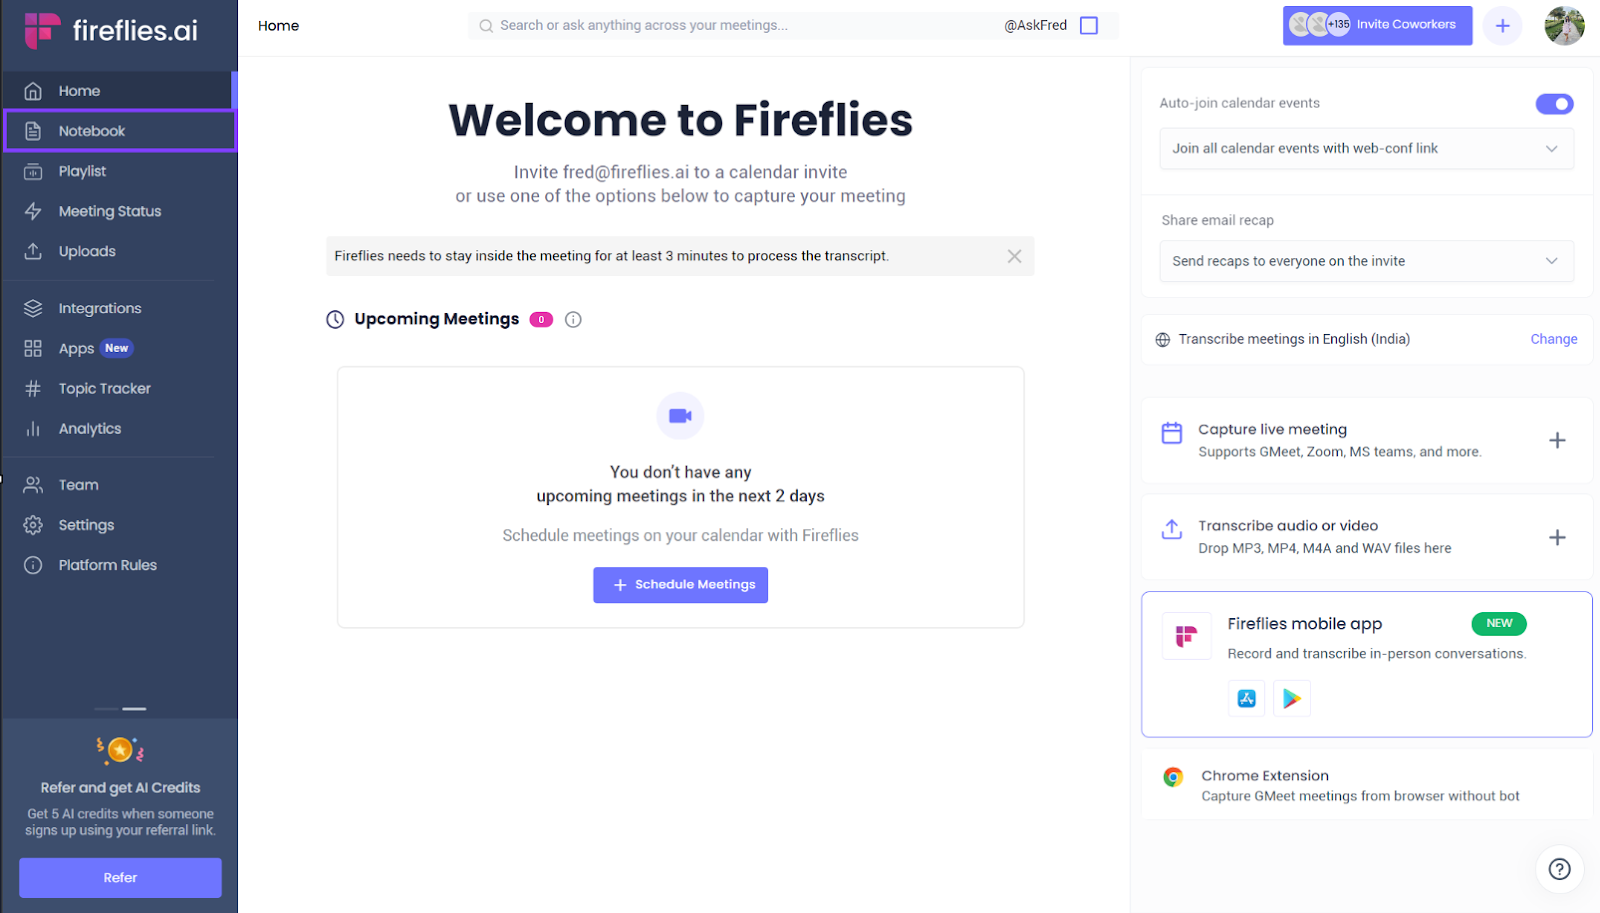 Open the meeting from your Fireflies Notebook